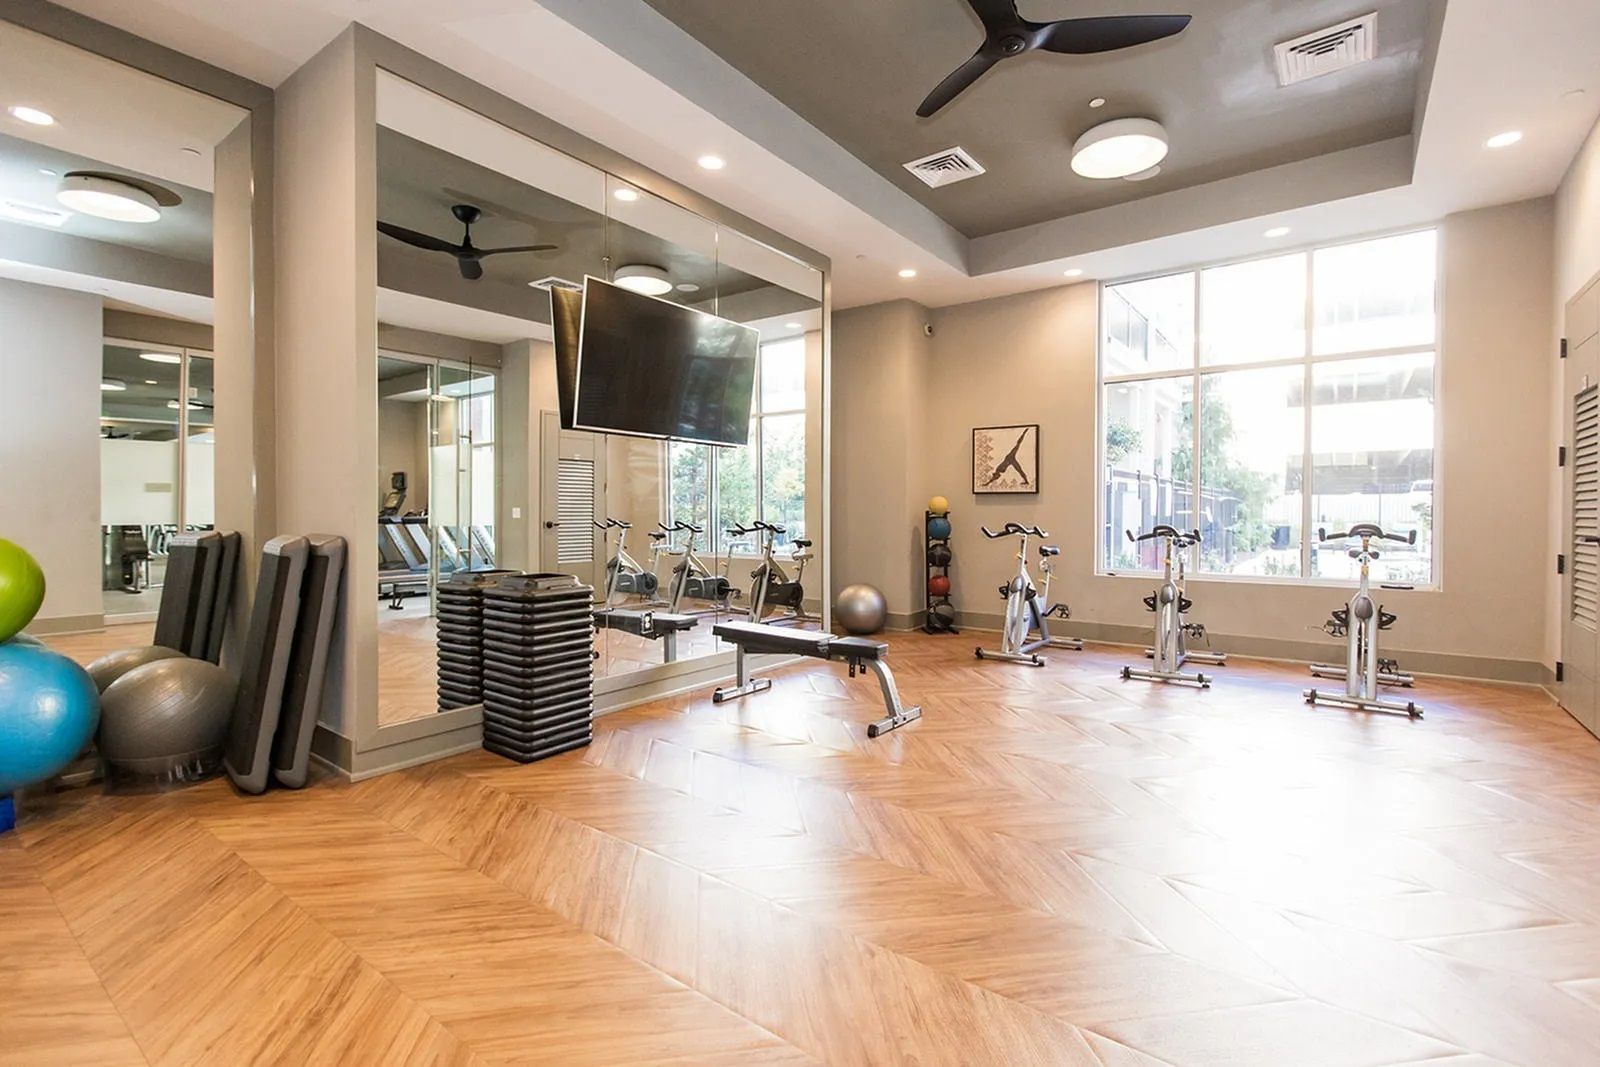 Fitness center studio at The Southerly.